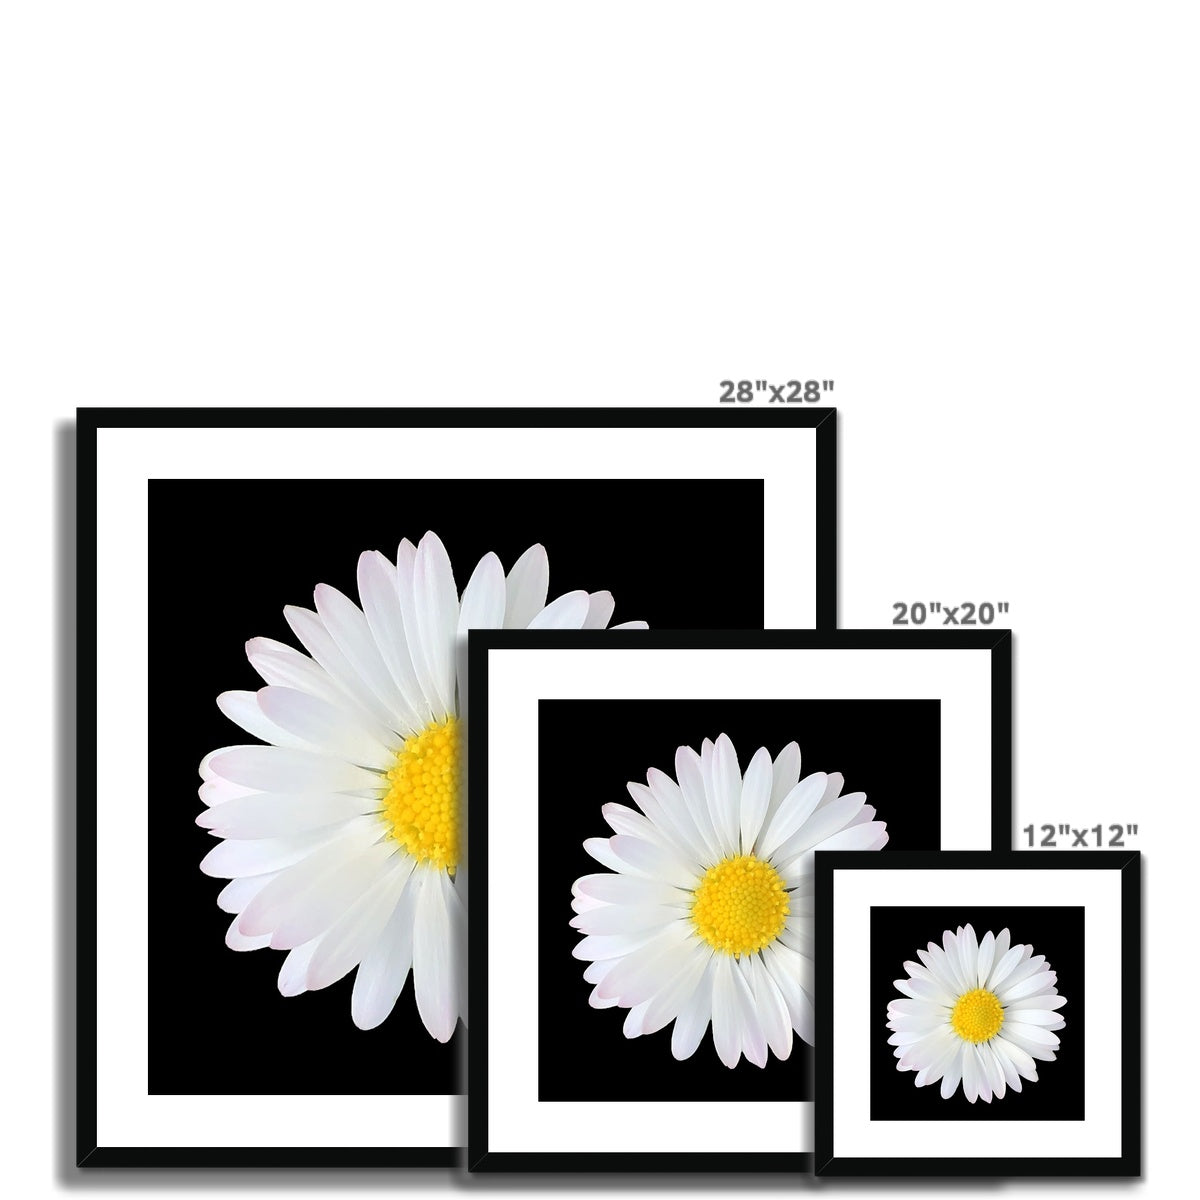 Daisy Print Framed & Mounted Print - Nature of Flowers